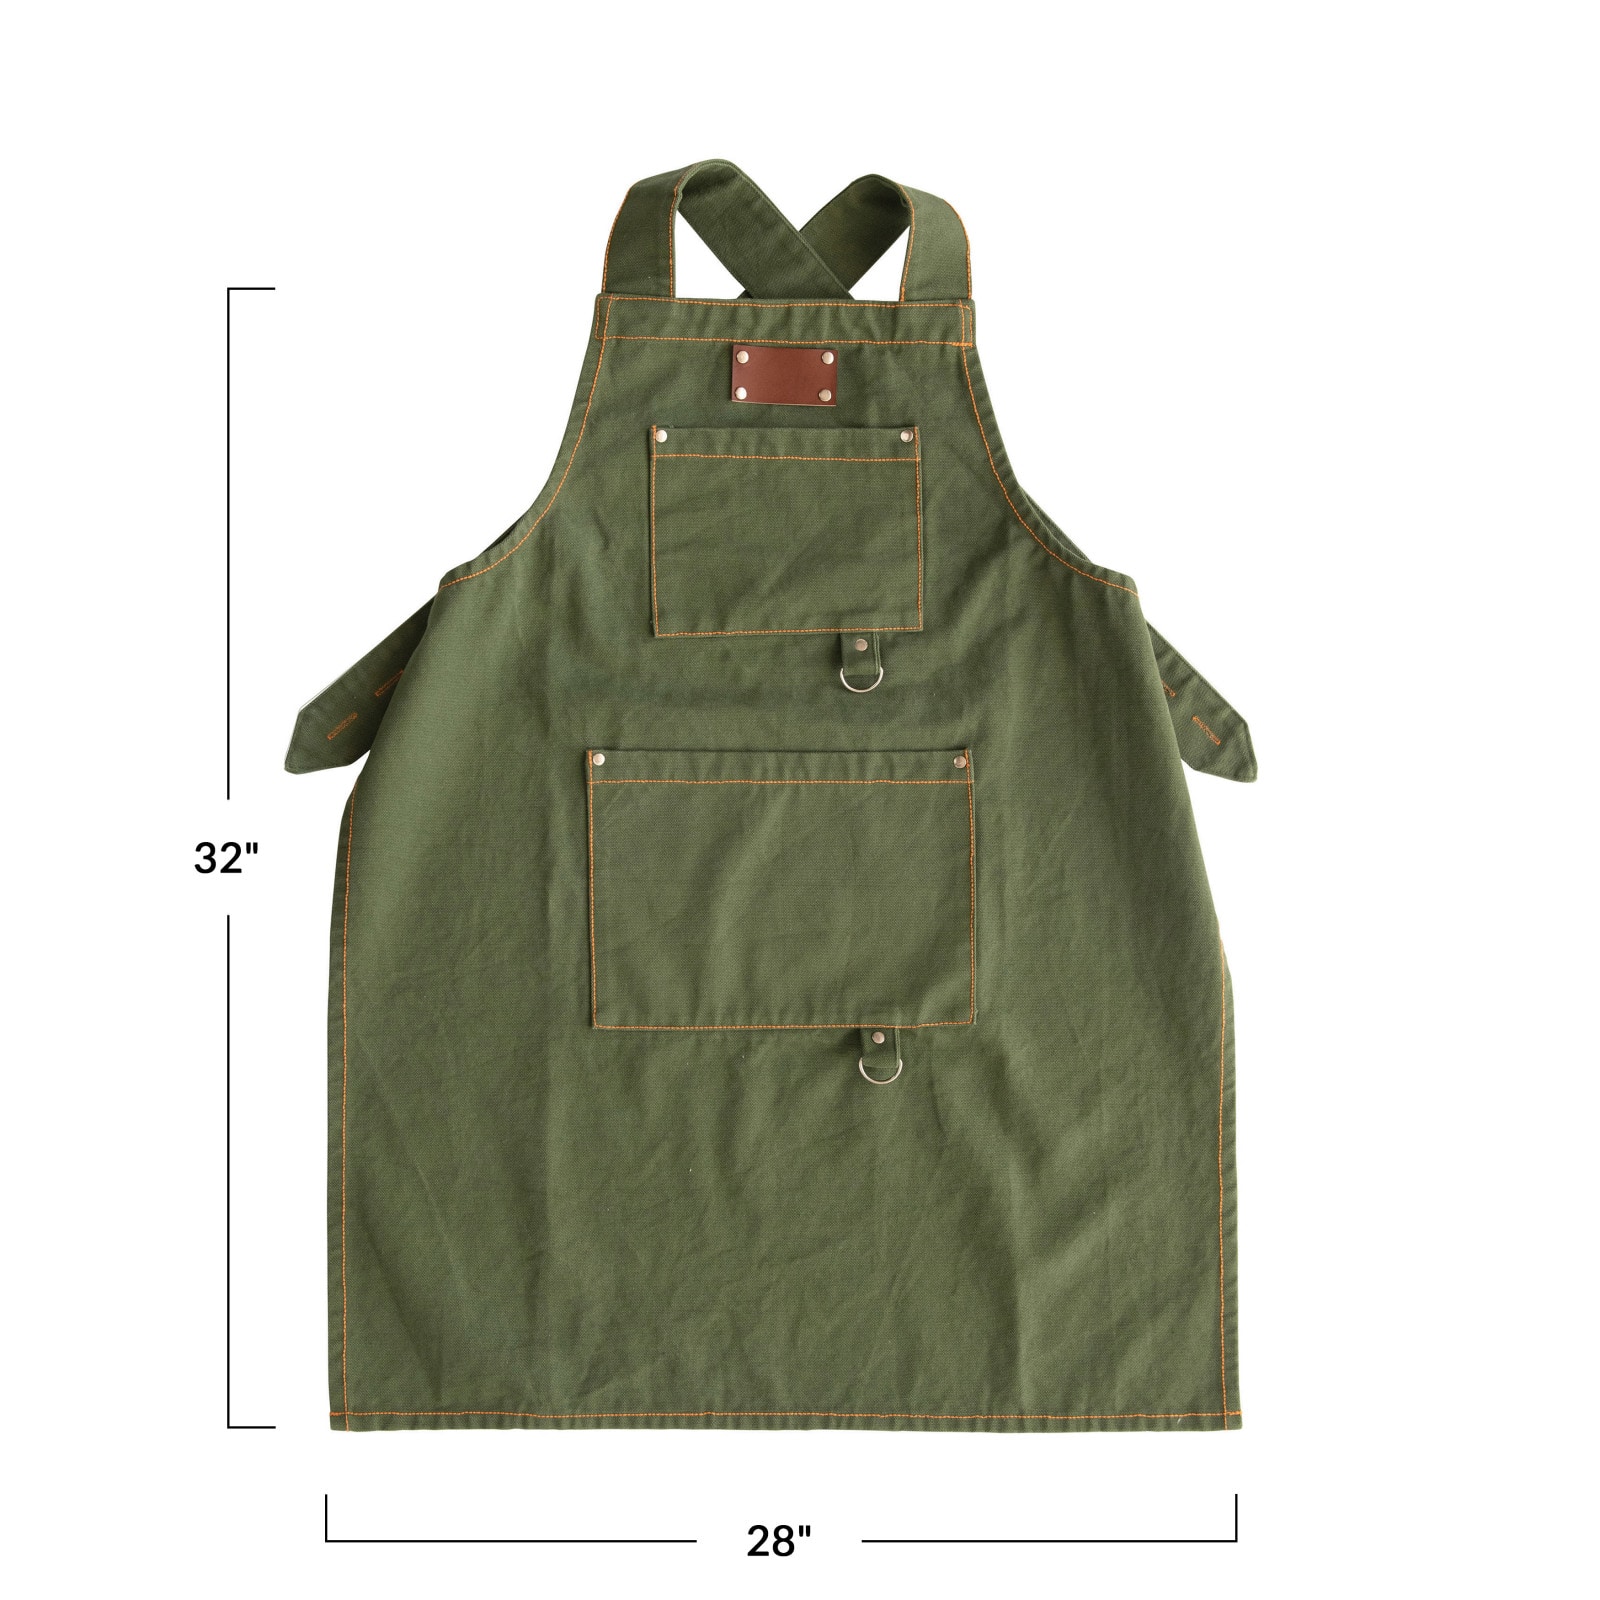 Green Cross Back Apron with Pockets &#x26; Rivets